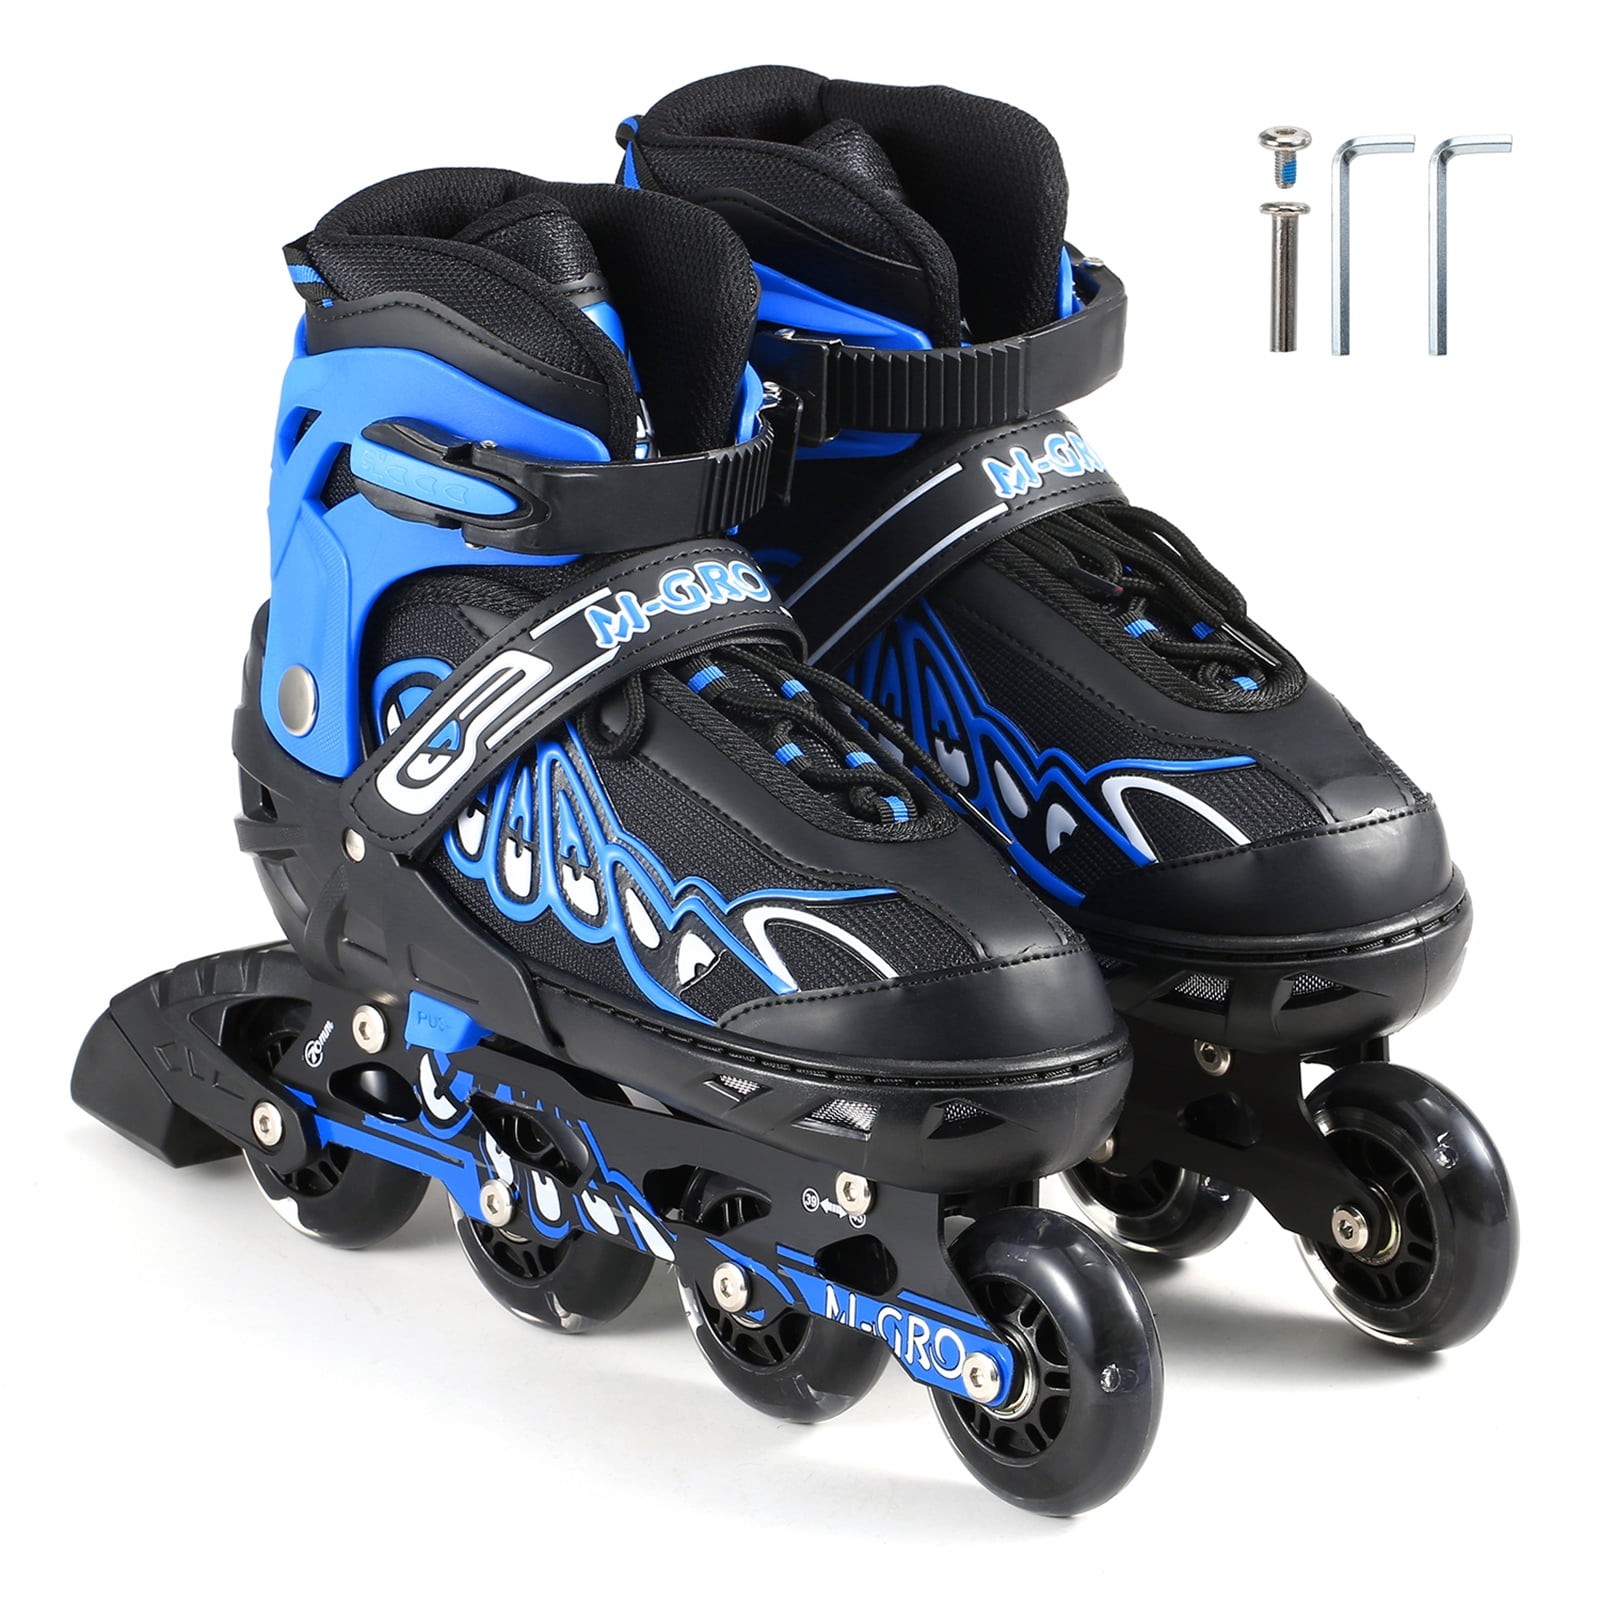 Indoor Roller Skates with high boots for teens and adults BLACK Details about   BIG SALE 